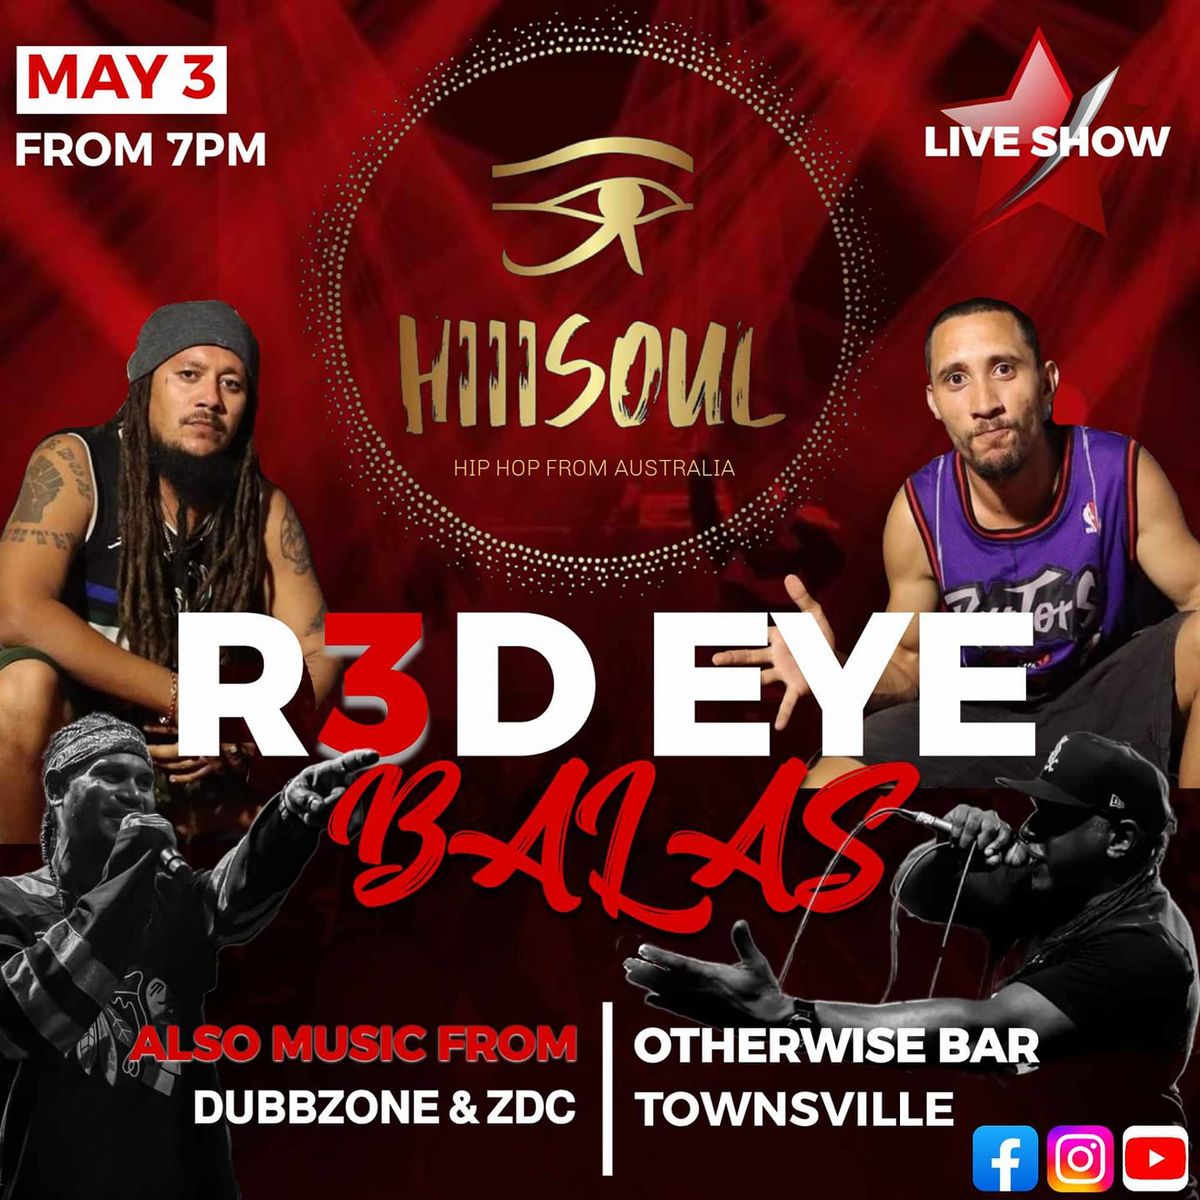 HiiiSOUL Present's R3B in Townsville, with special guest's ZDC & DubbZone